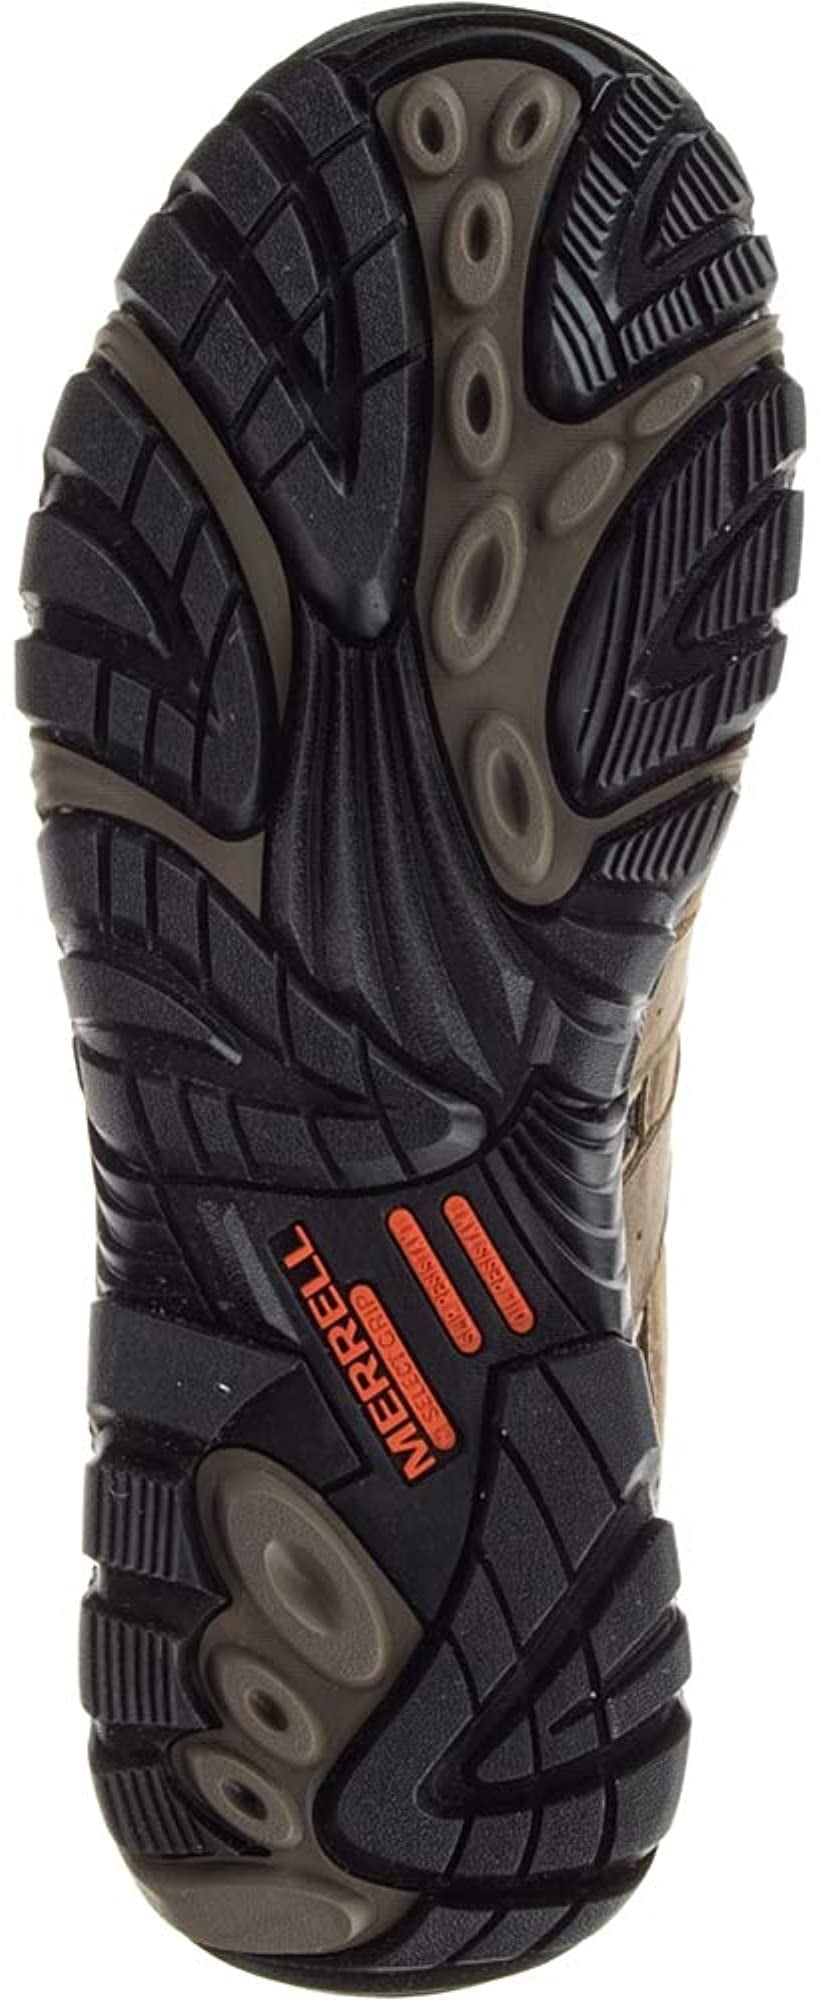 Merrell J15753 Moab 2 Composite Safety Steel Toe Waterproof Work BOOTS Mens 9 for sale online 